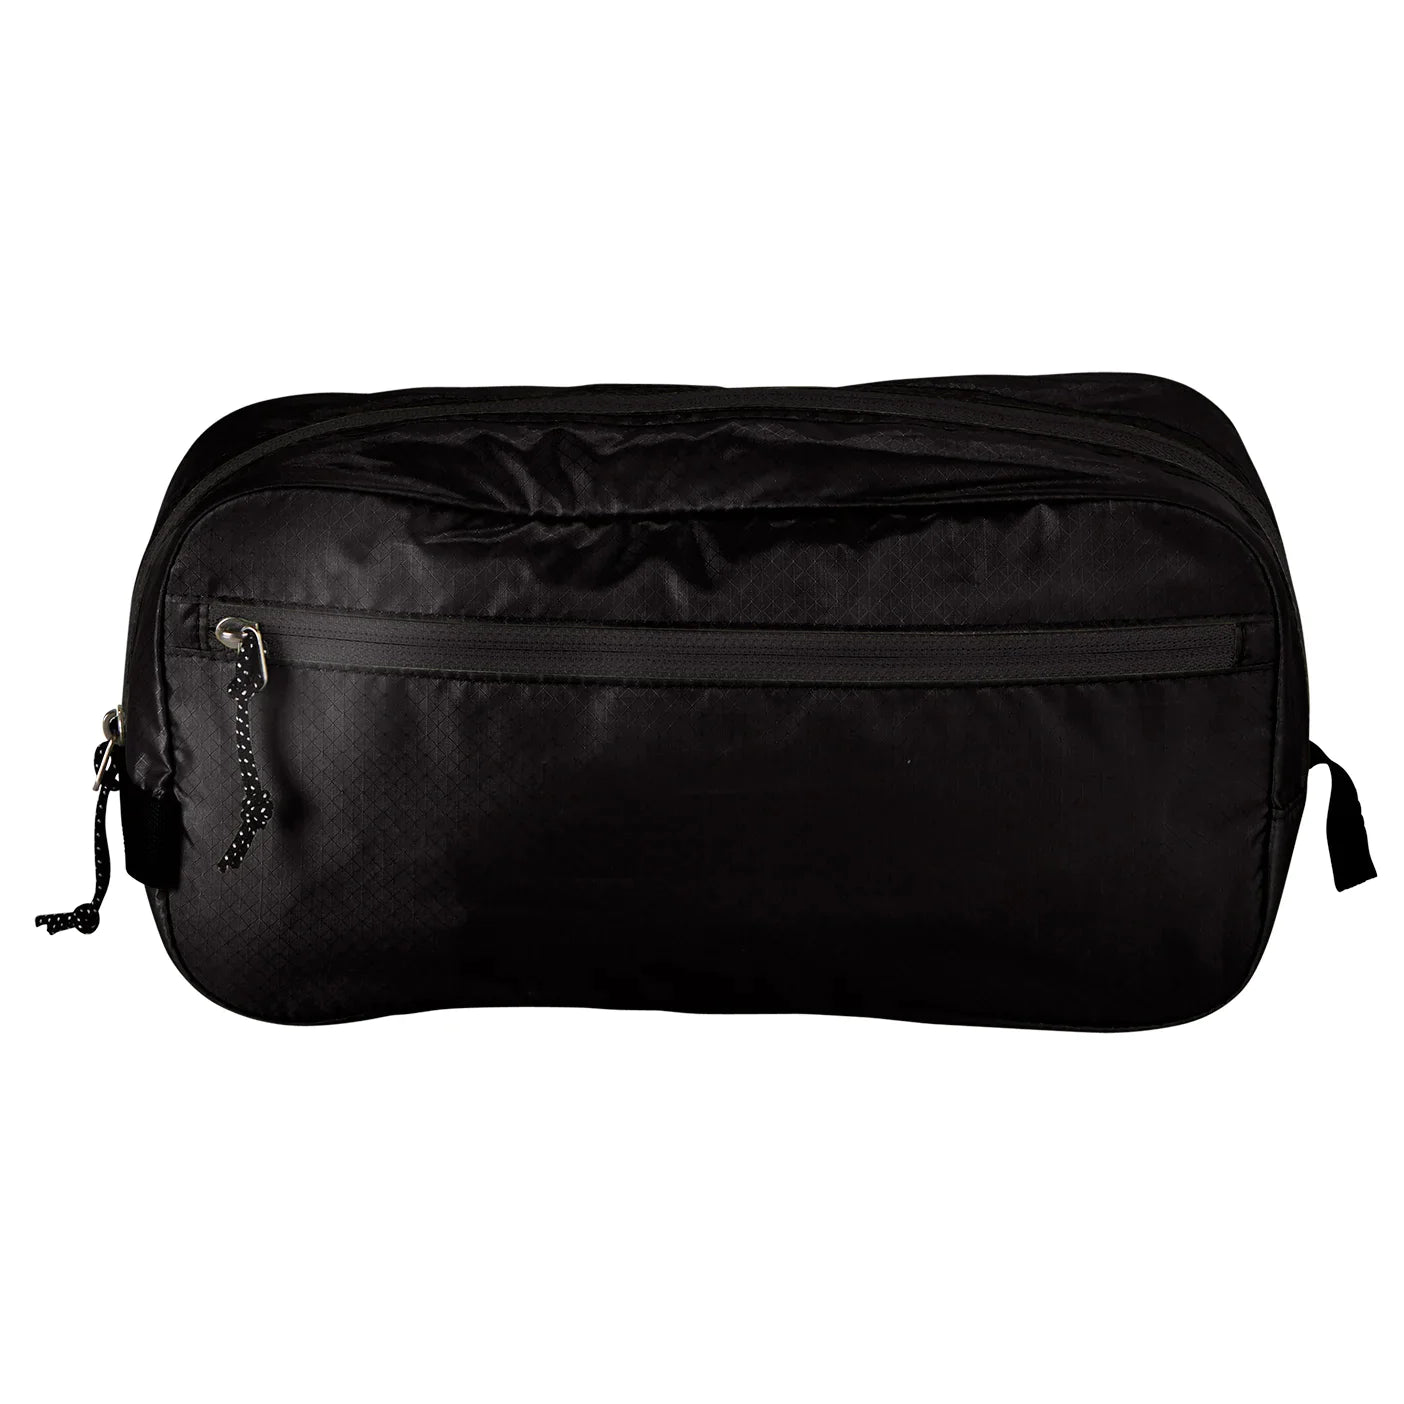 Eagle Creek Pack-It Isolate Quick Trip Toiletry Bag S 25 cm - black